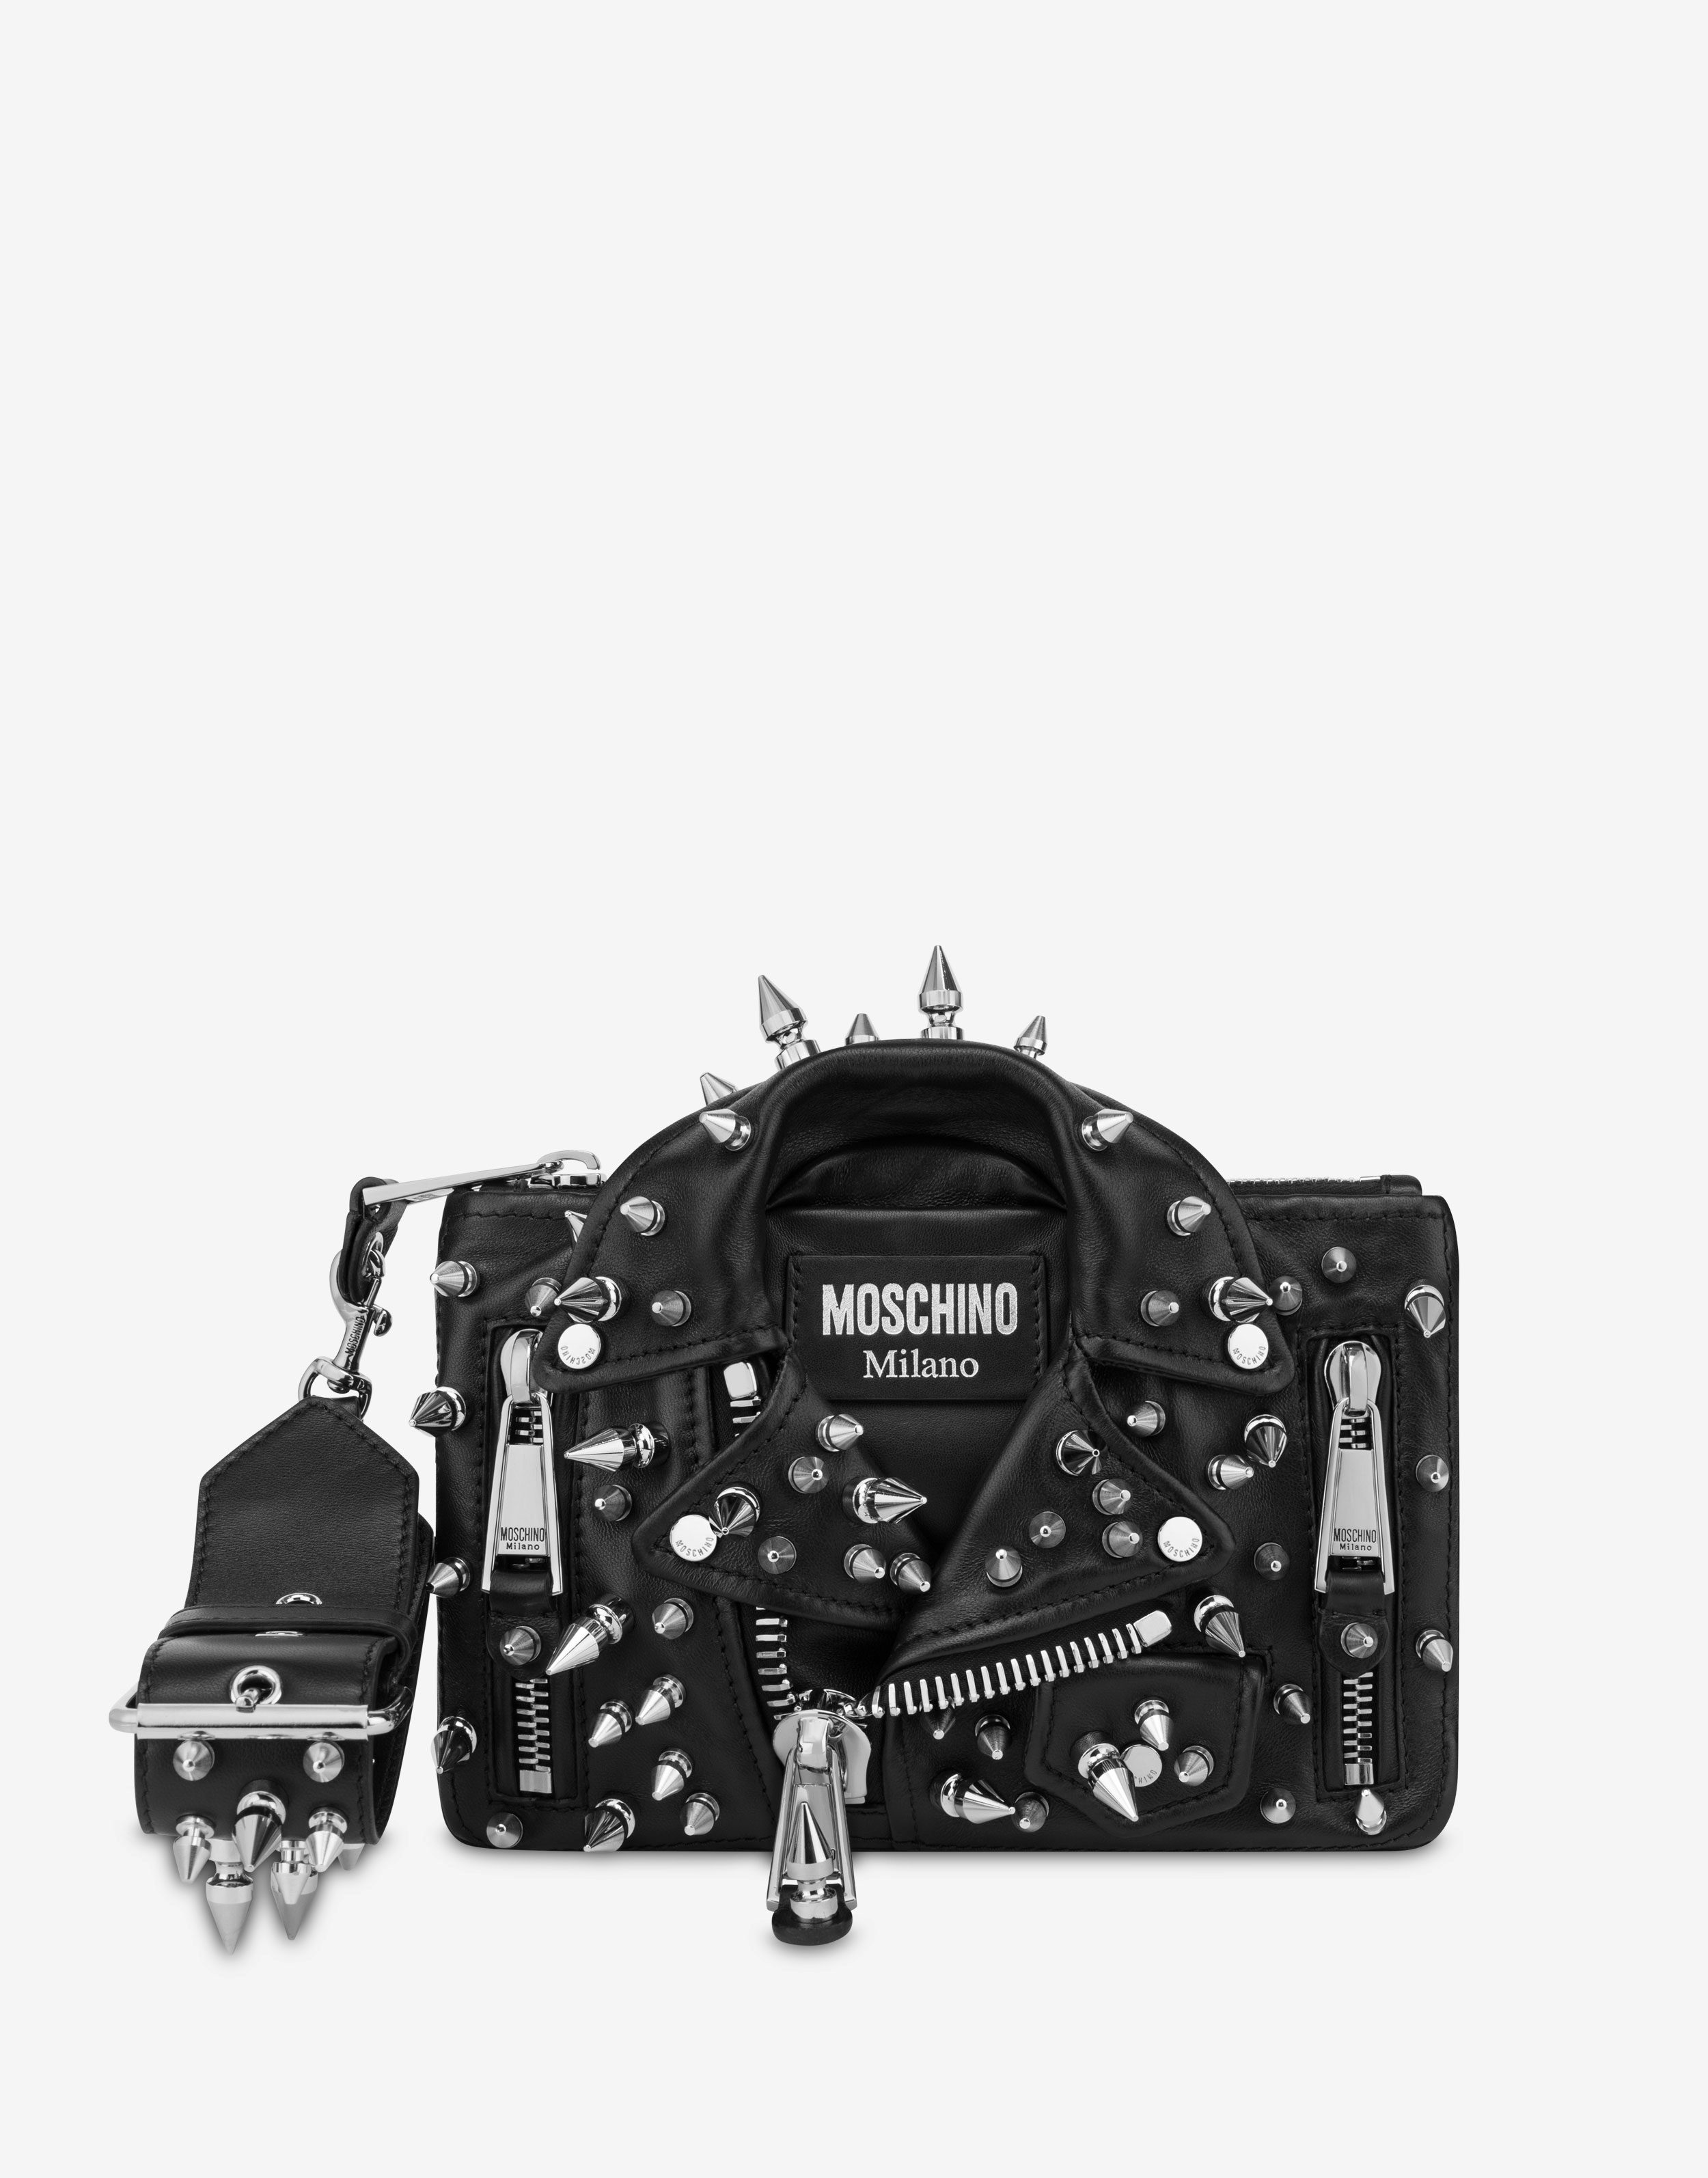 Moschino Biker Bag clutch in nappa leather with studs